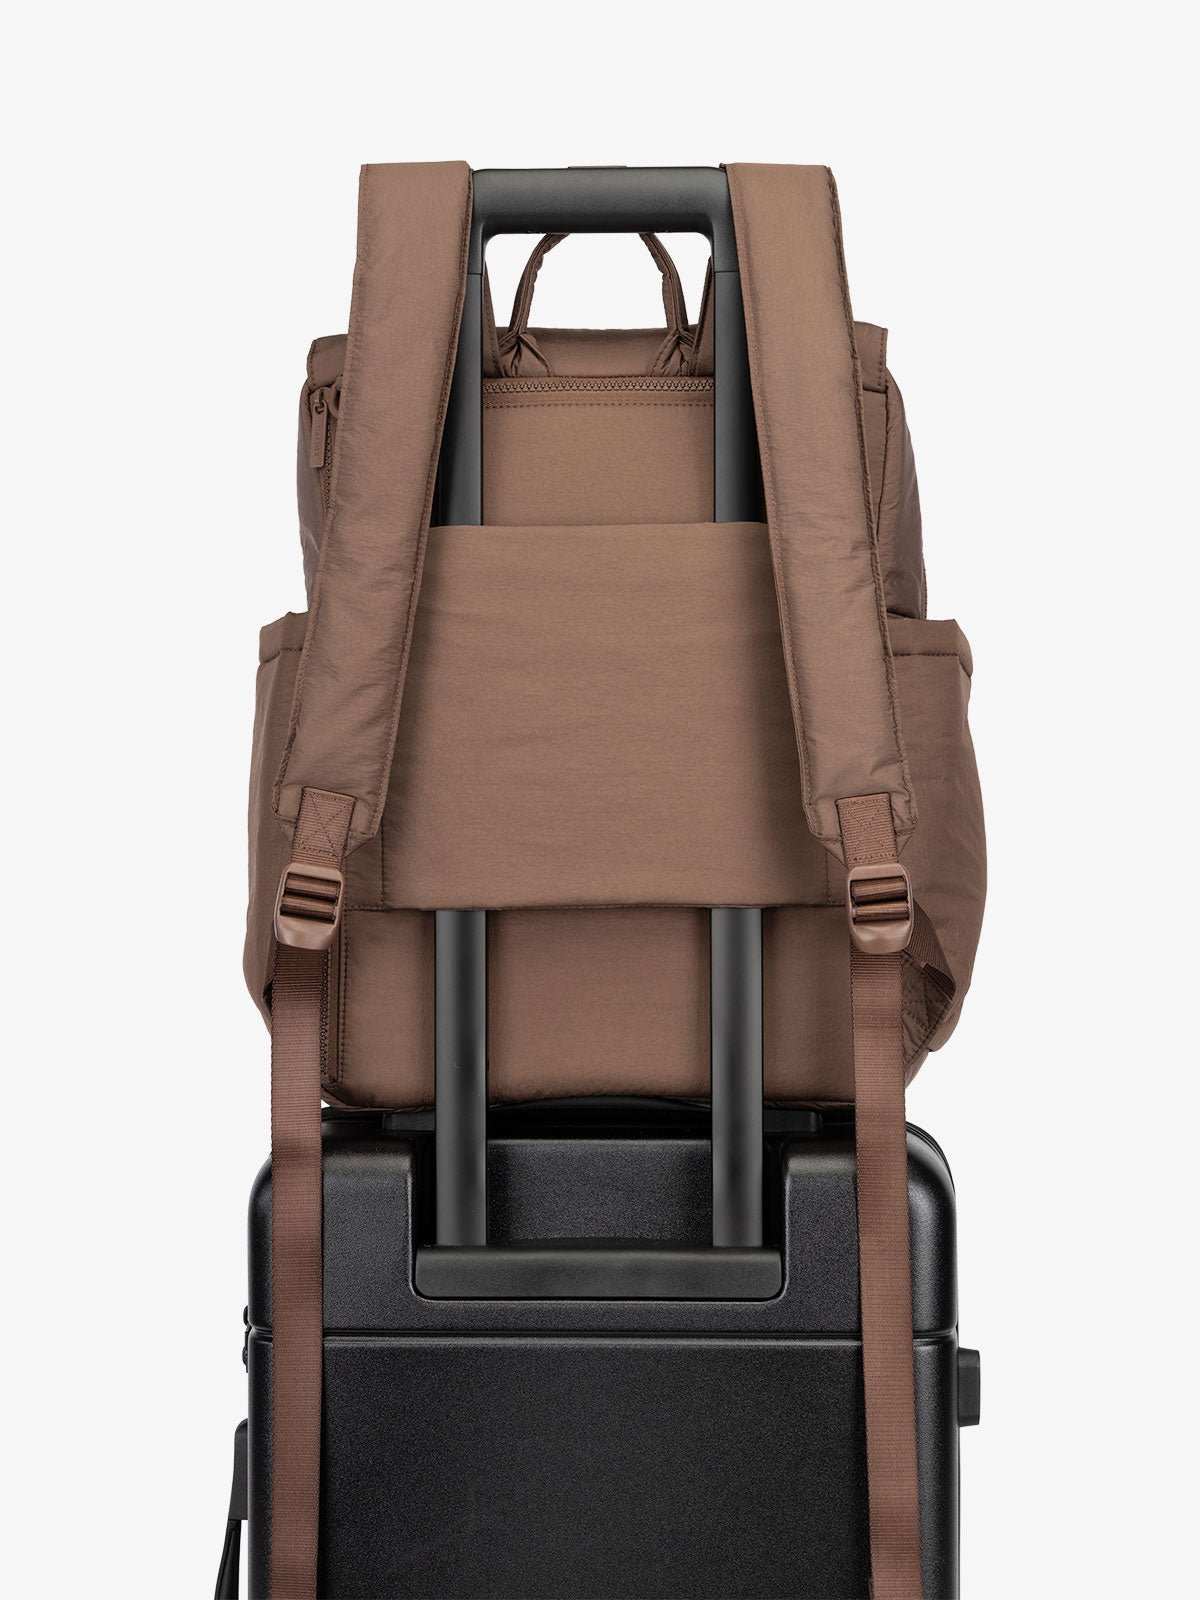 CALPAK Diaper Backpack with Laptop Sleeve featuring luggage trolley sleeve with hidden pocket in brown